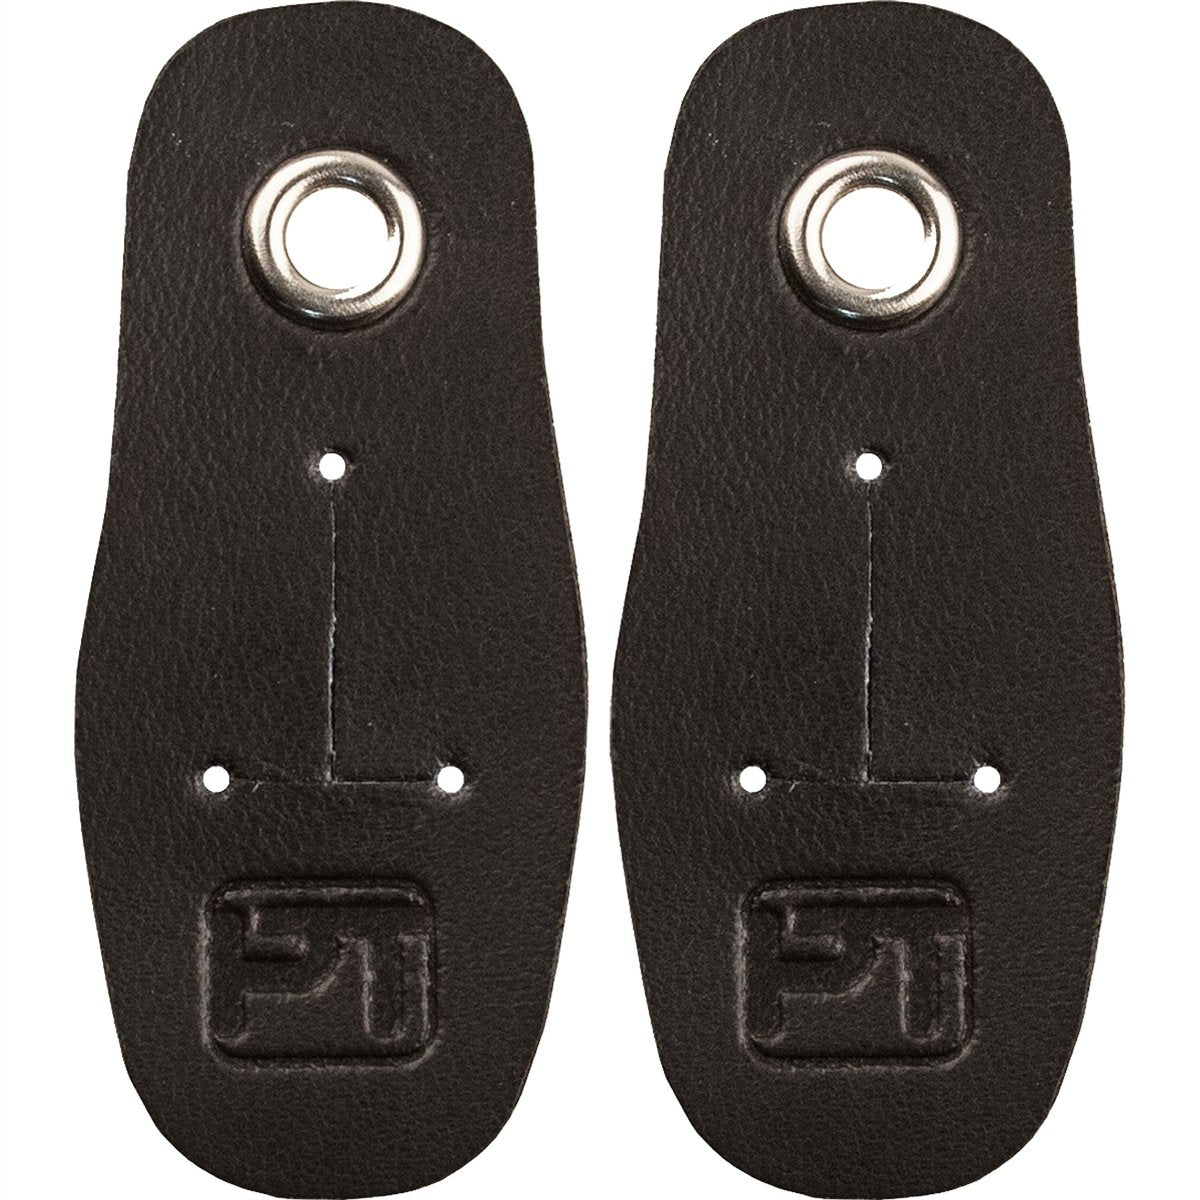 Protec - Replacement Leather Thumb Tabs (Pair) for Protec Clarinet Neck Strap-Accessories-Protec-Large-Music Elements